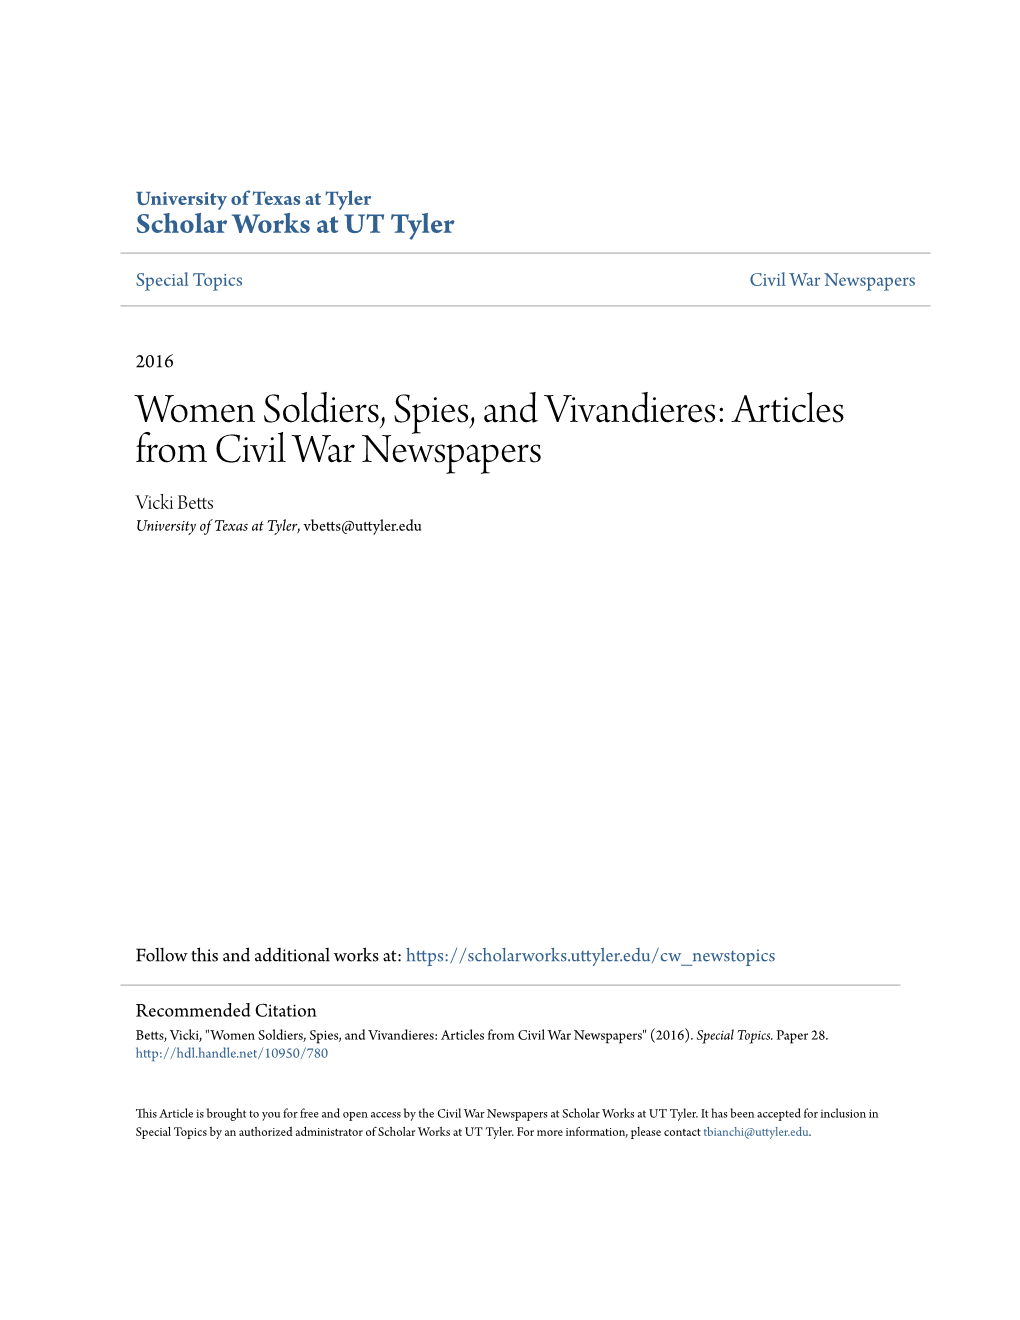 Women Soldiers, Spies, and Vivandieres: Articles from Civil War Newspapers Vicki Betts University of Texas at Tyler, Vbetts@Uttyler.Edu